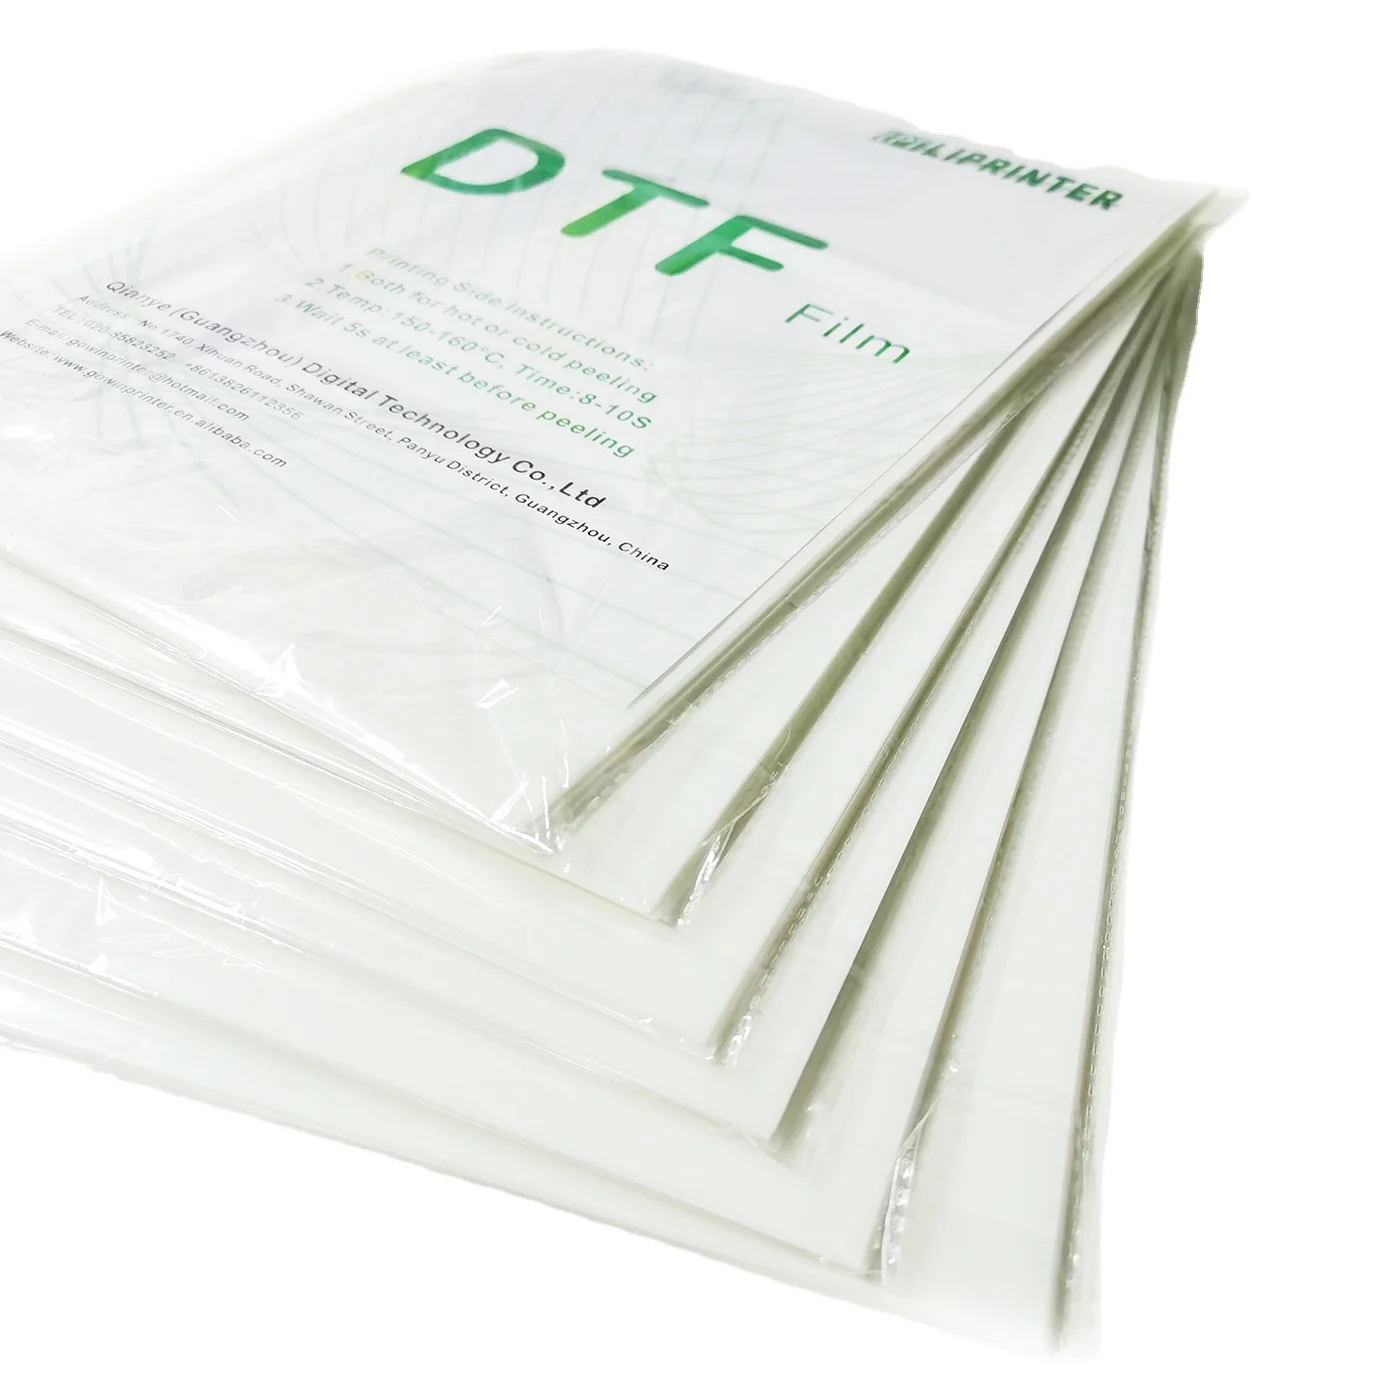 

High stability dtf pet film sheet A4 A4+ A3 A3+ size for DTF heat transfer printing for T-Shirts DTF sheet film